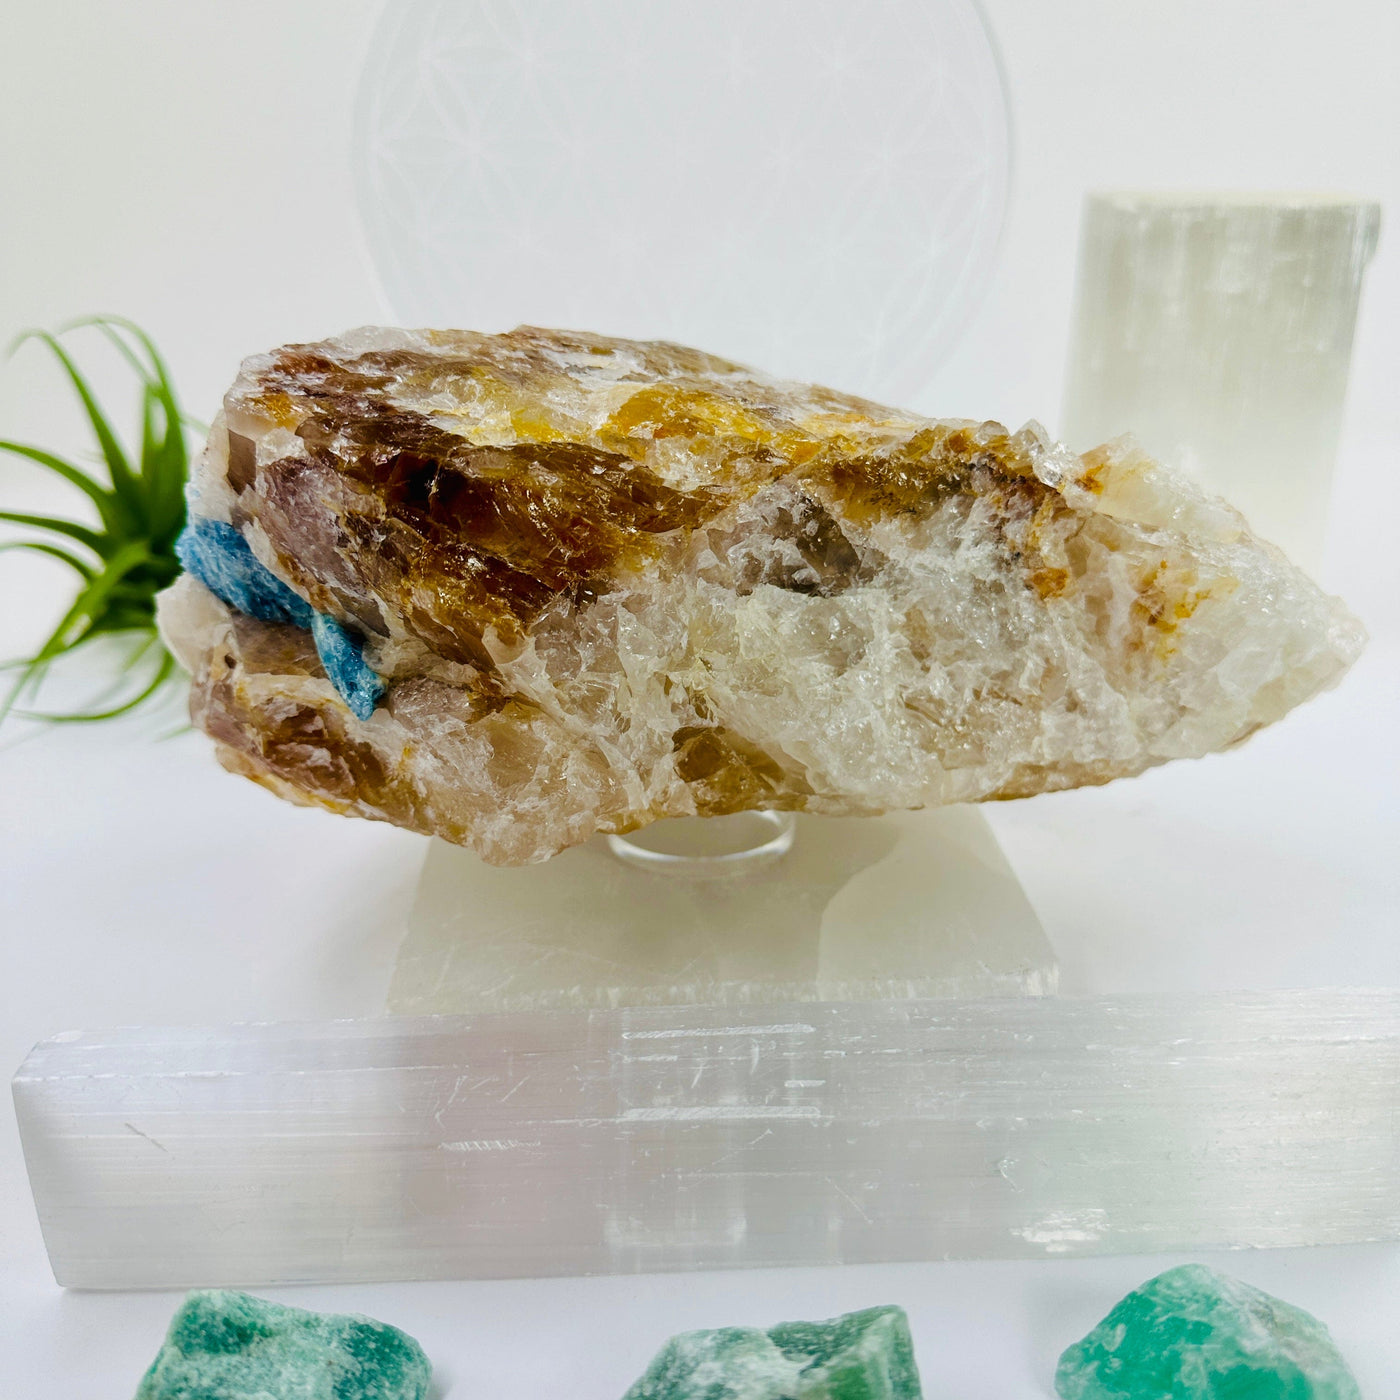 Aquamarine in matrix - aquamarine crystal embedded in large natural rough stone side view